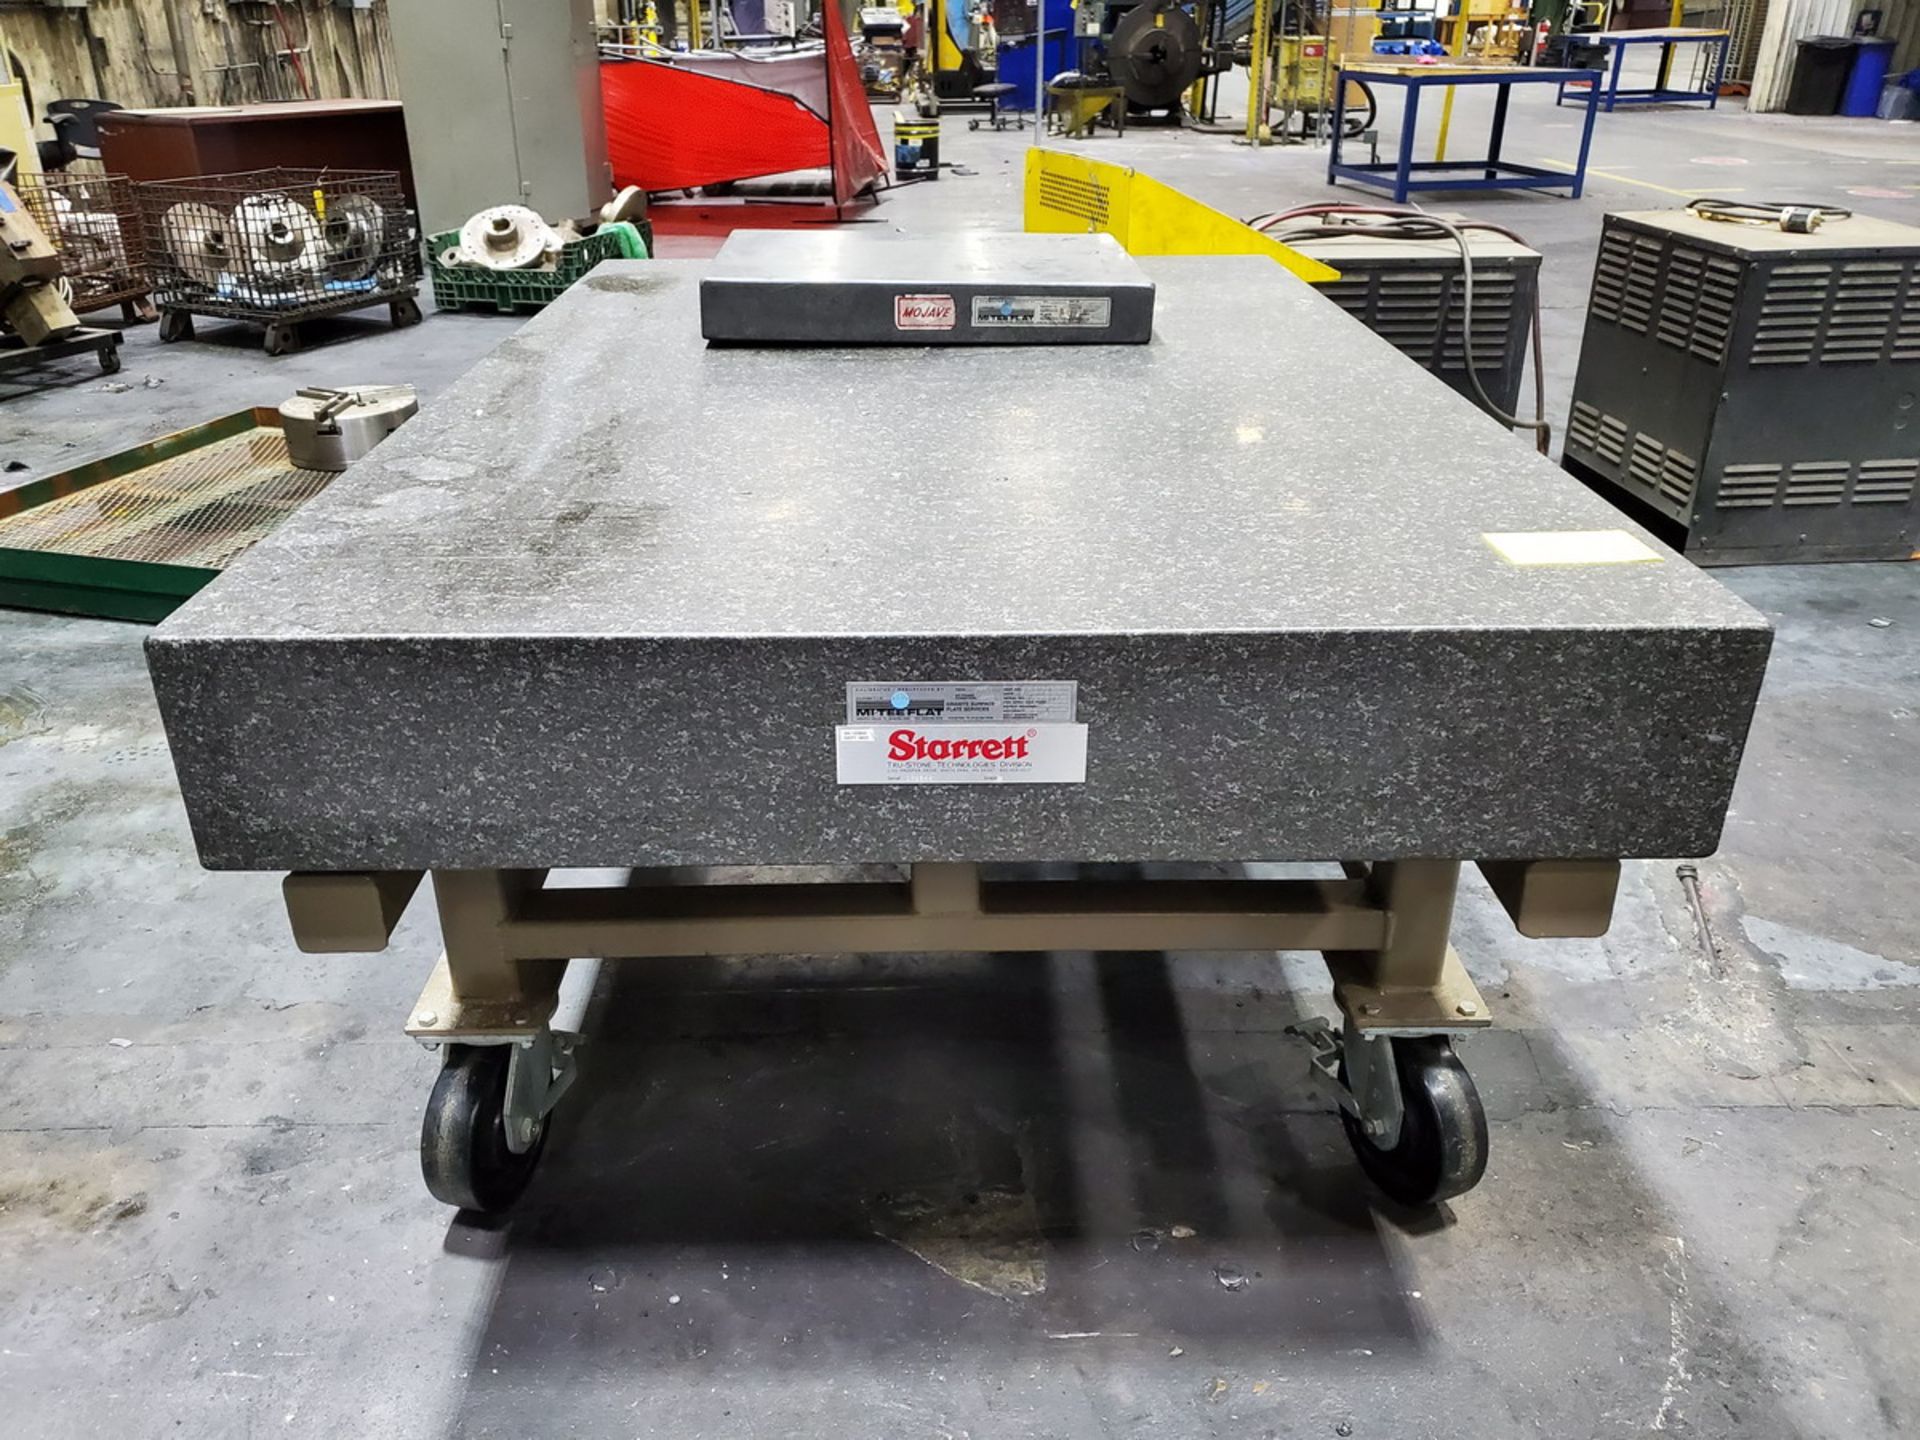 Starrett Granite Surface Plate 6' x 4' x 8", W/ Rolling Cart (Smaller Surface Plate Excluded) - Image 2 of 4